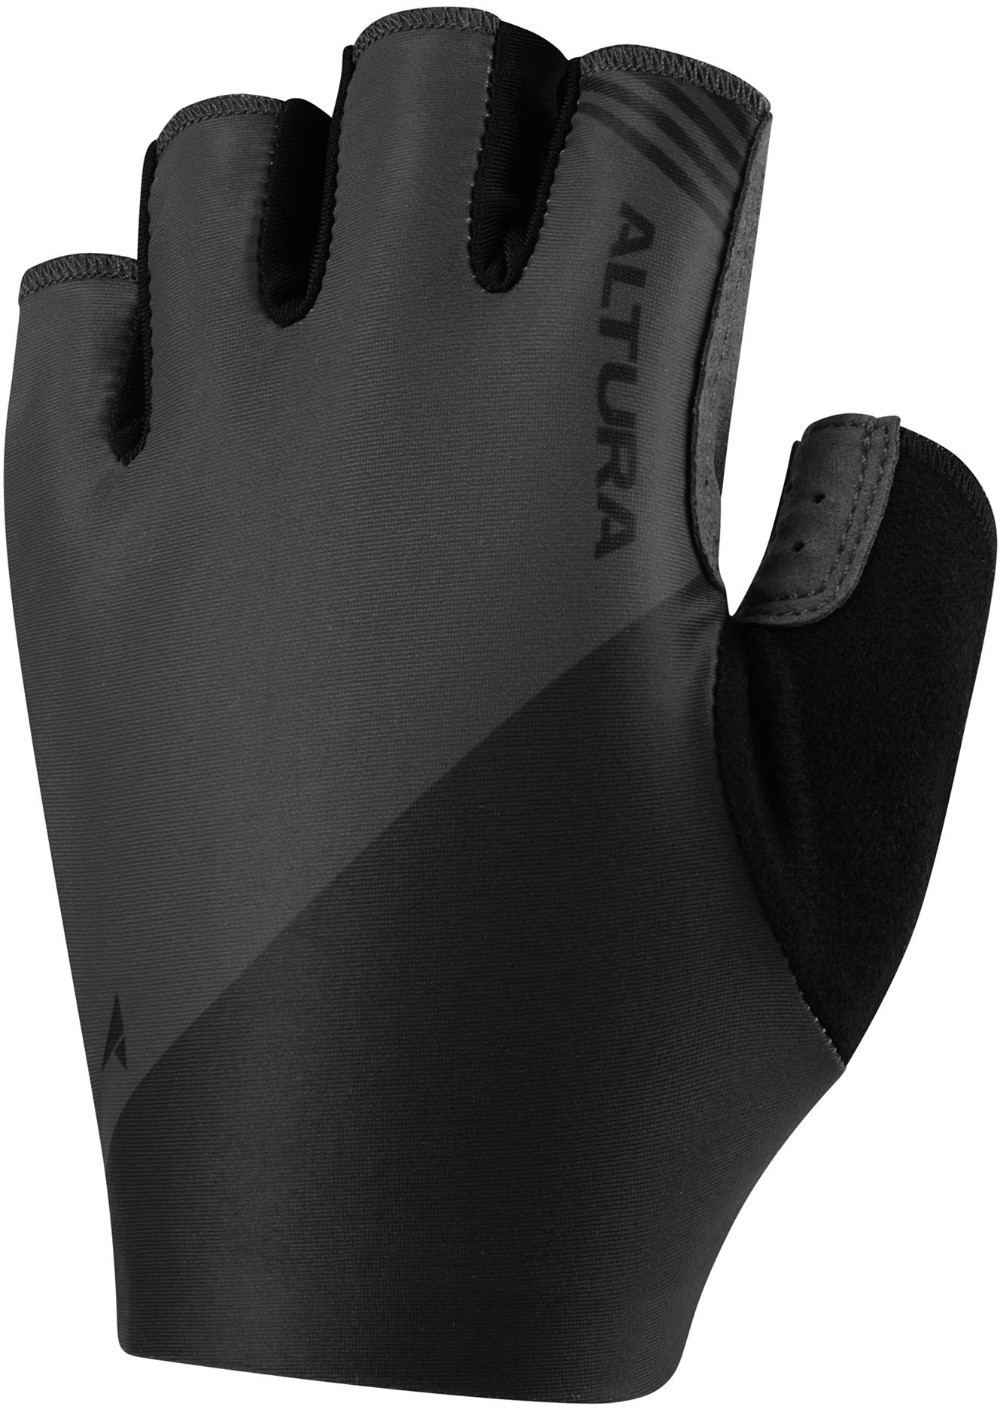 Airstream Mitts Short Finger Gloves image 0